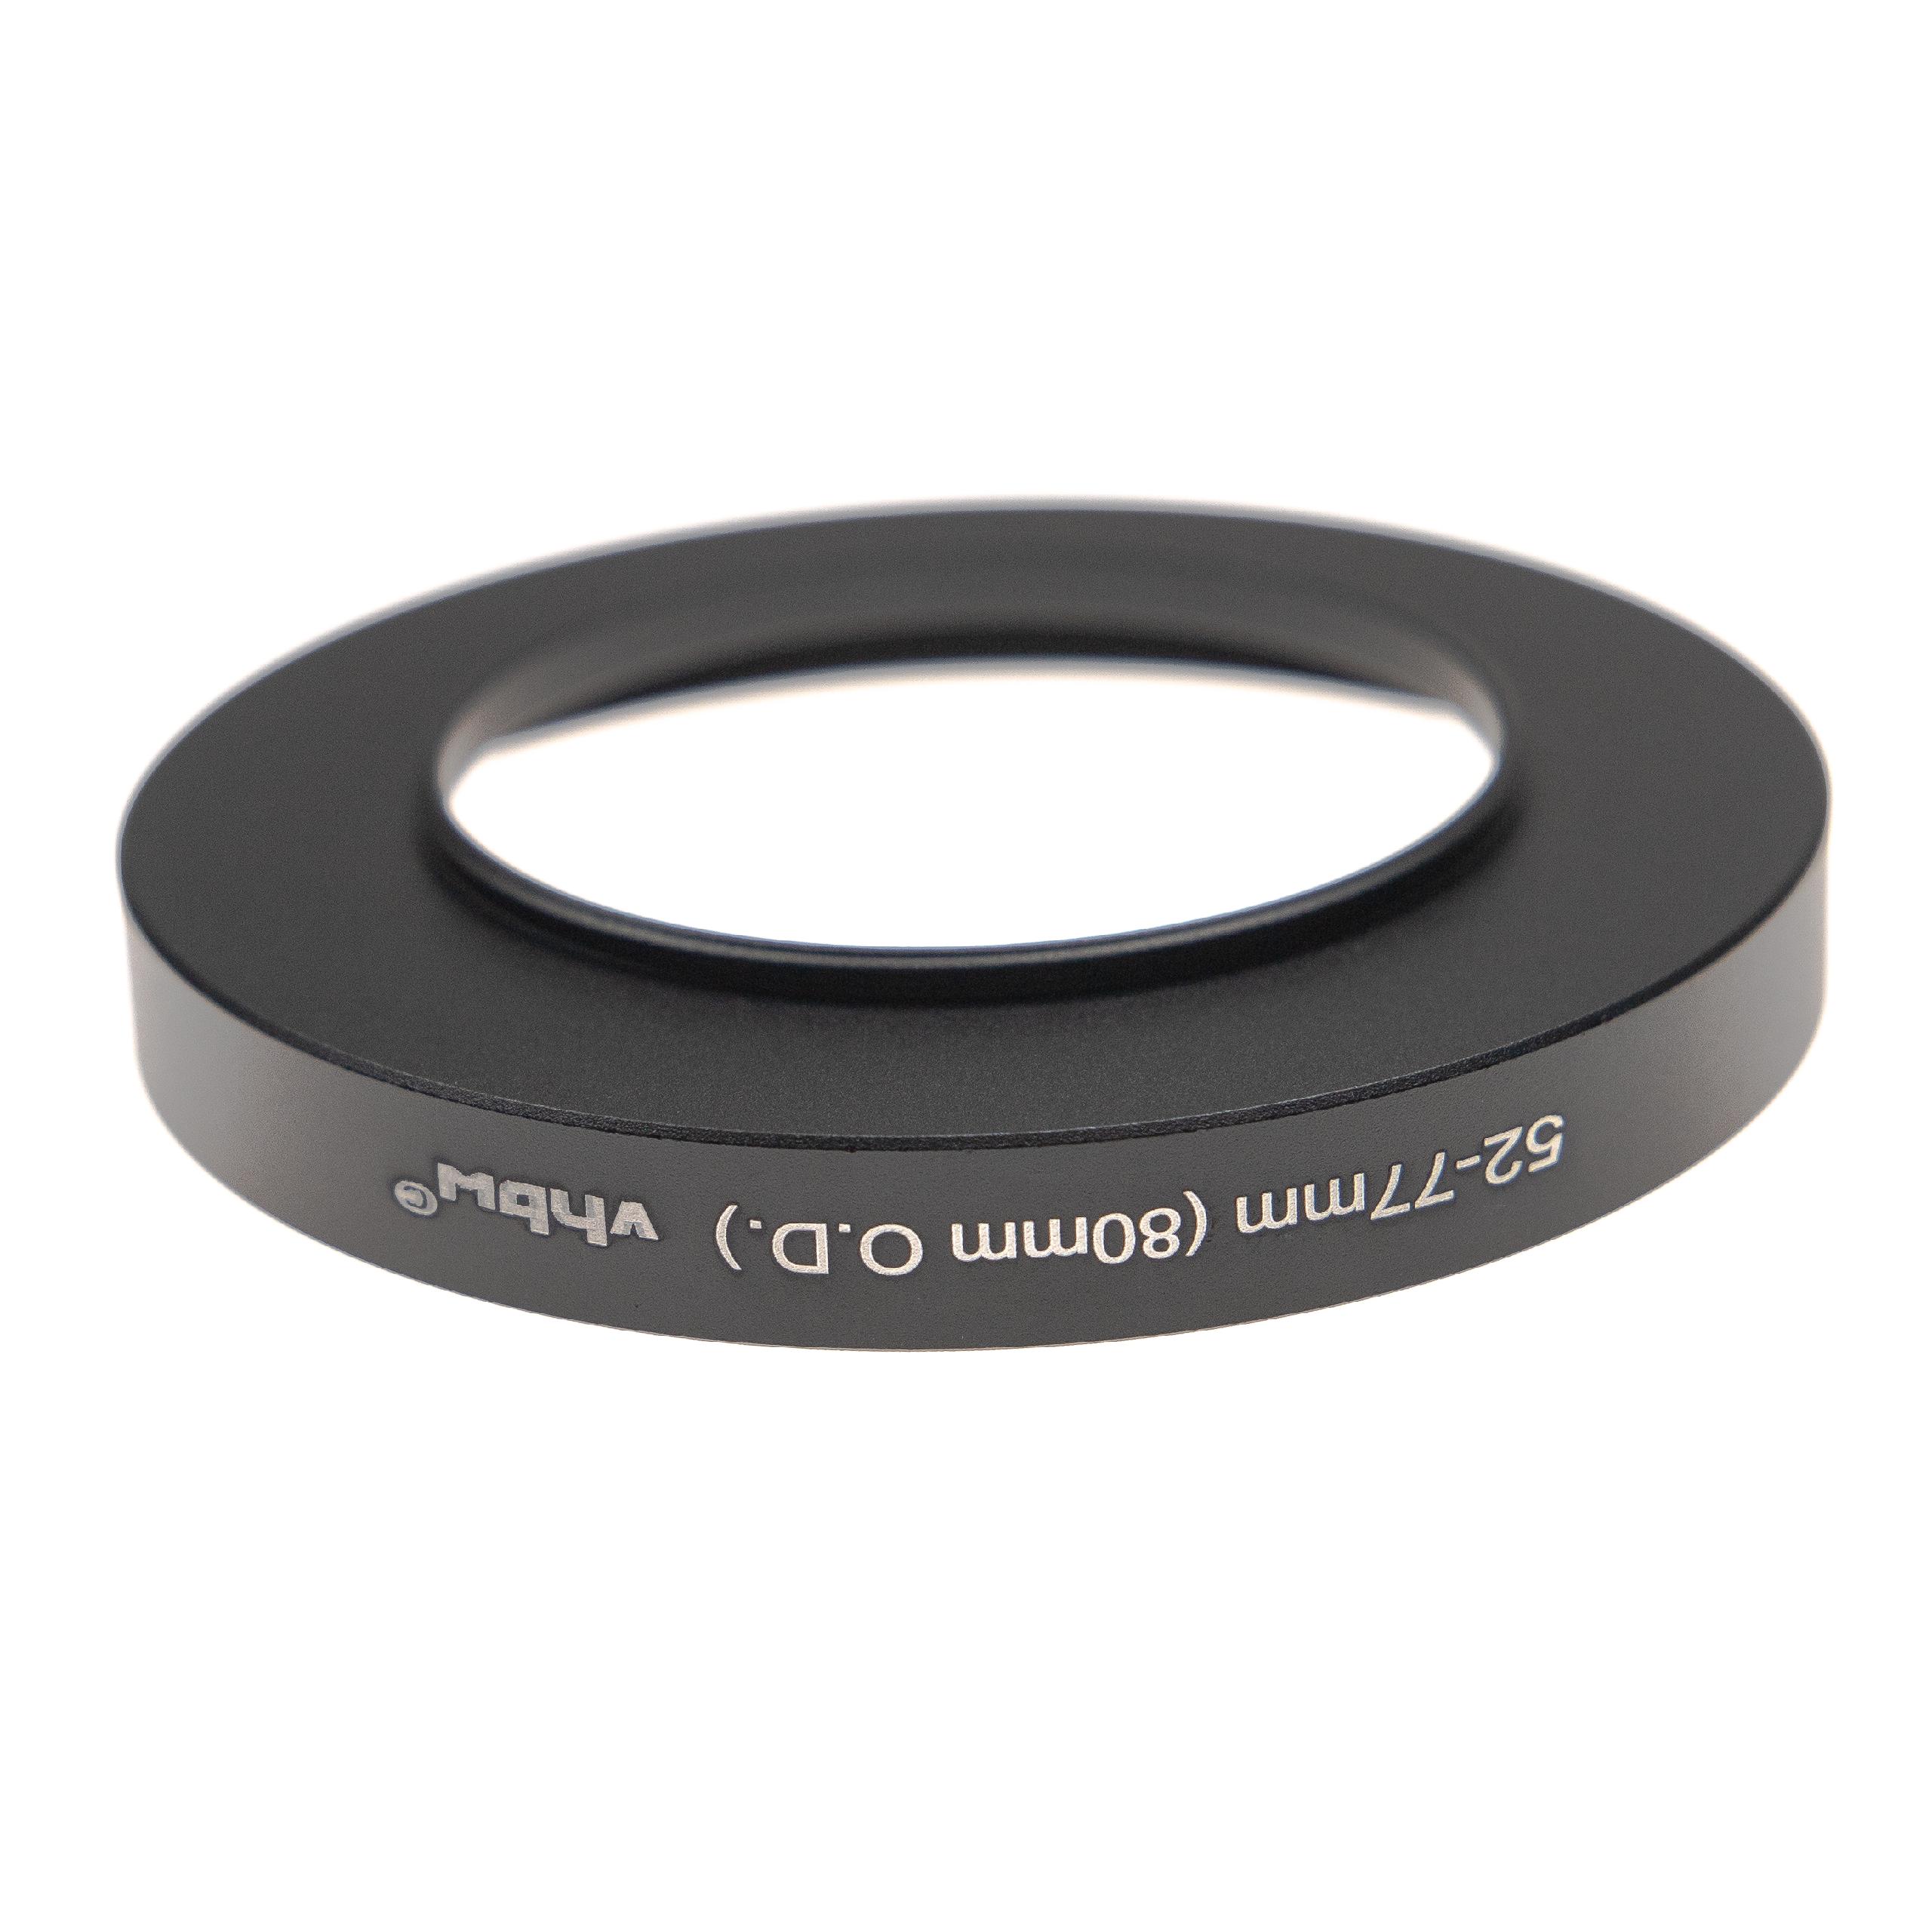 Step-Up Ring Adapter of 52 mm to 77 mm for matte box 80 mm O.D. - Filter Adapter